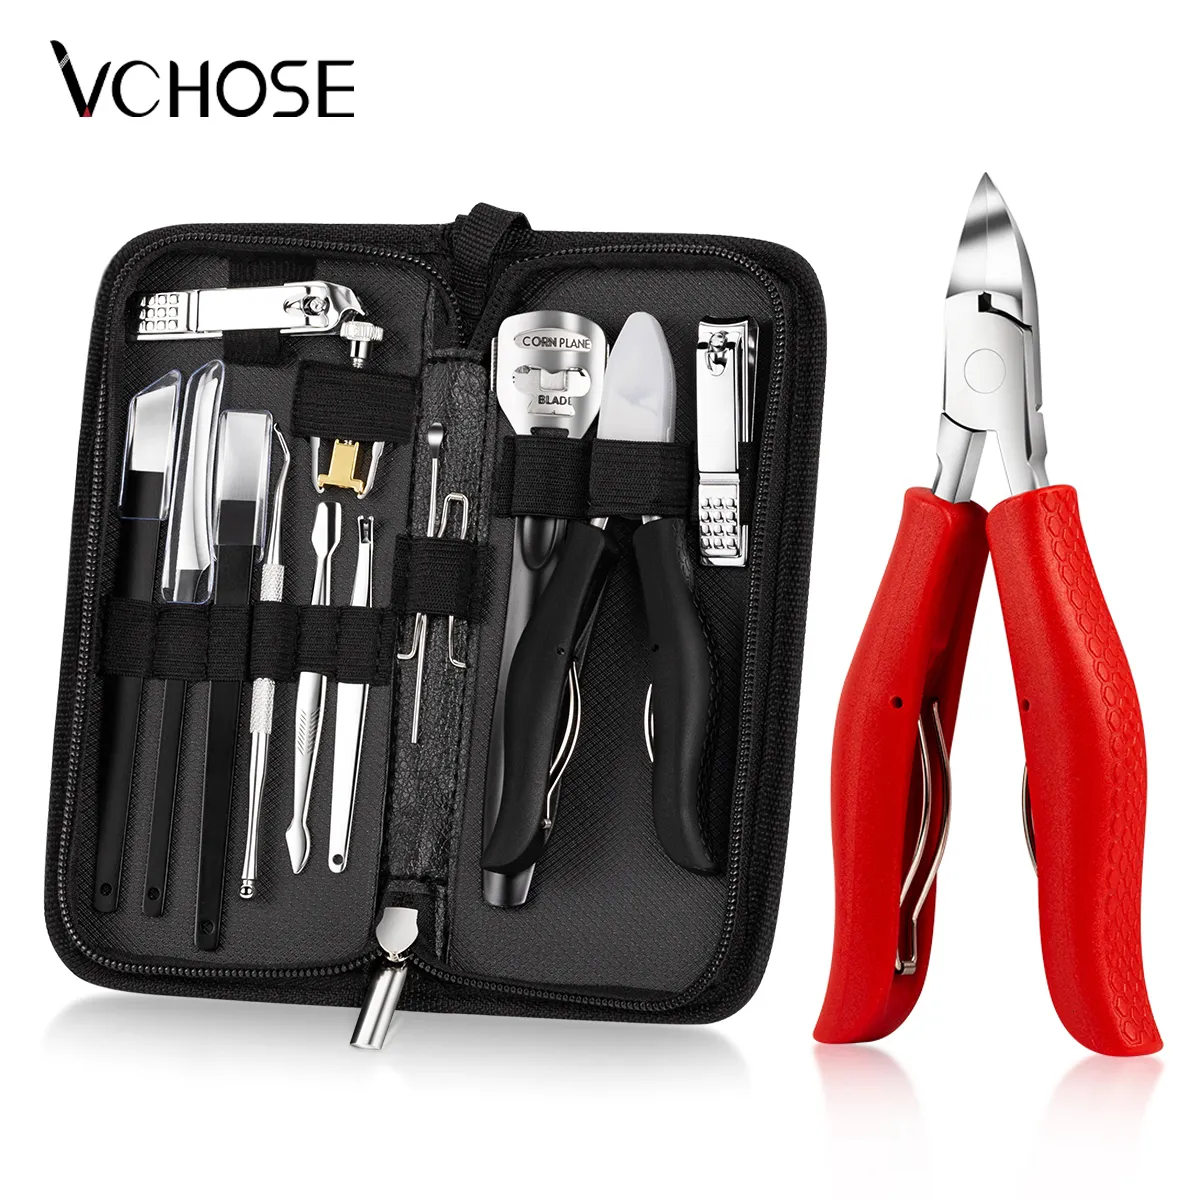 Nail Manicure Set 16pcsset Pedicure Set Paronychia Improved Stainless Steel Nail Clippers Trimmer Ingrown Pedicure Care Toenail Manicure Cutters 230425